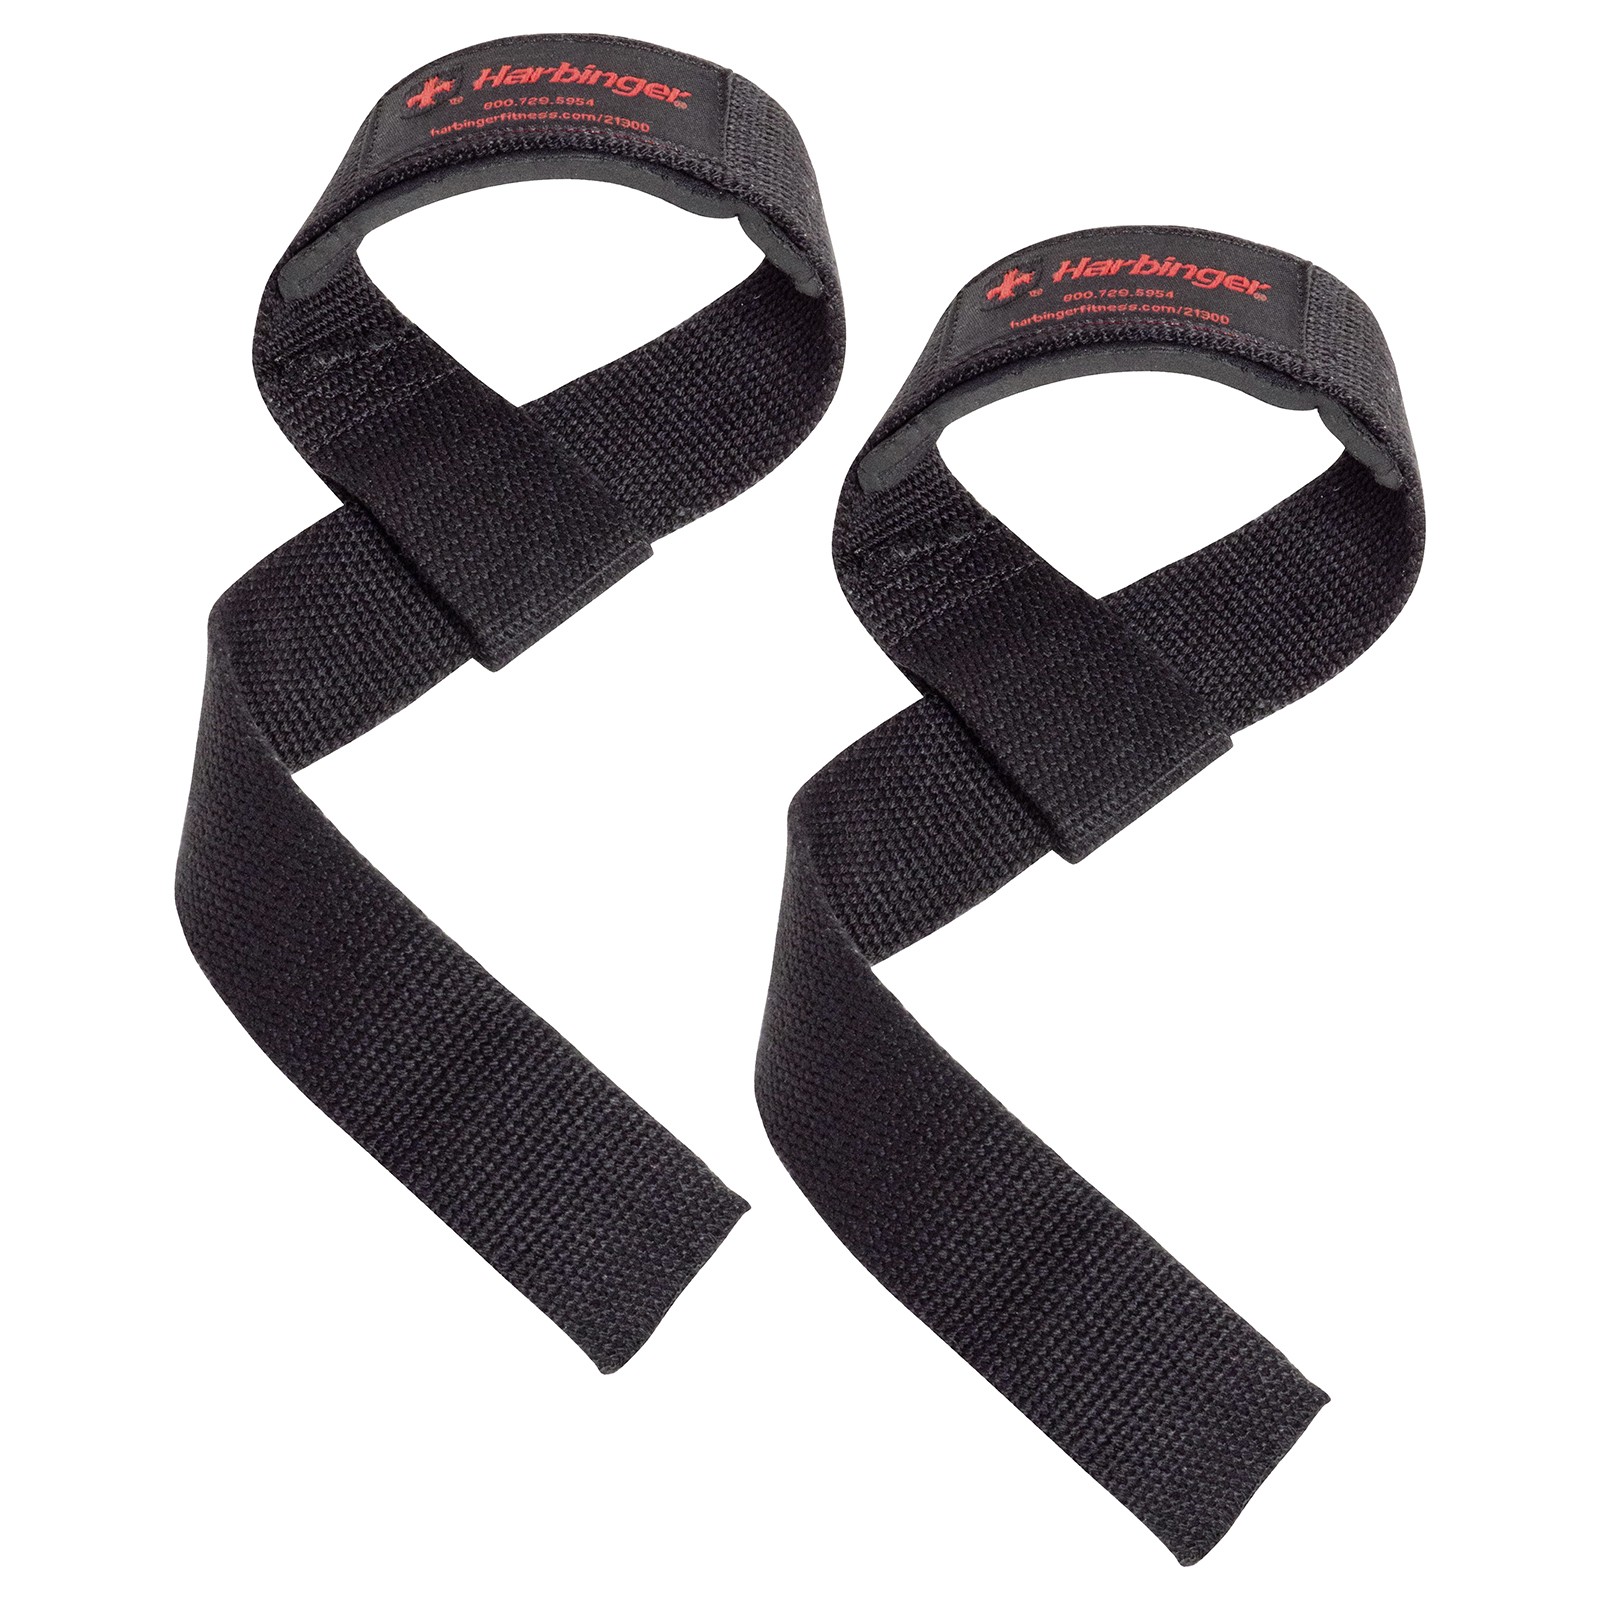 https://cdn-live.powerhouse-fitness.co.uk/pictures/harbinger/weight_lifting_accessories/FASA9109/HARB_21300_Product_PaddedCottonLiftingStraps_MV_1600_1600.jpg